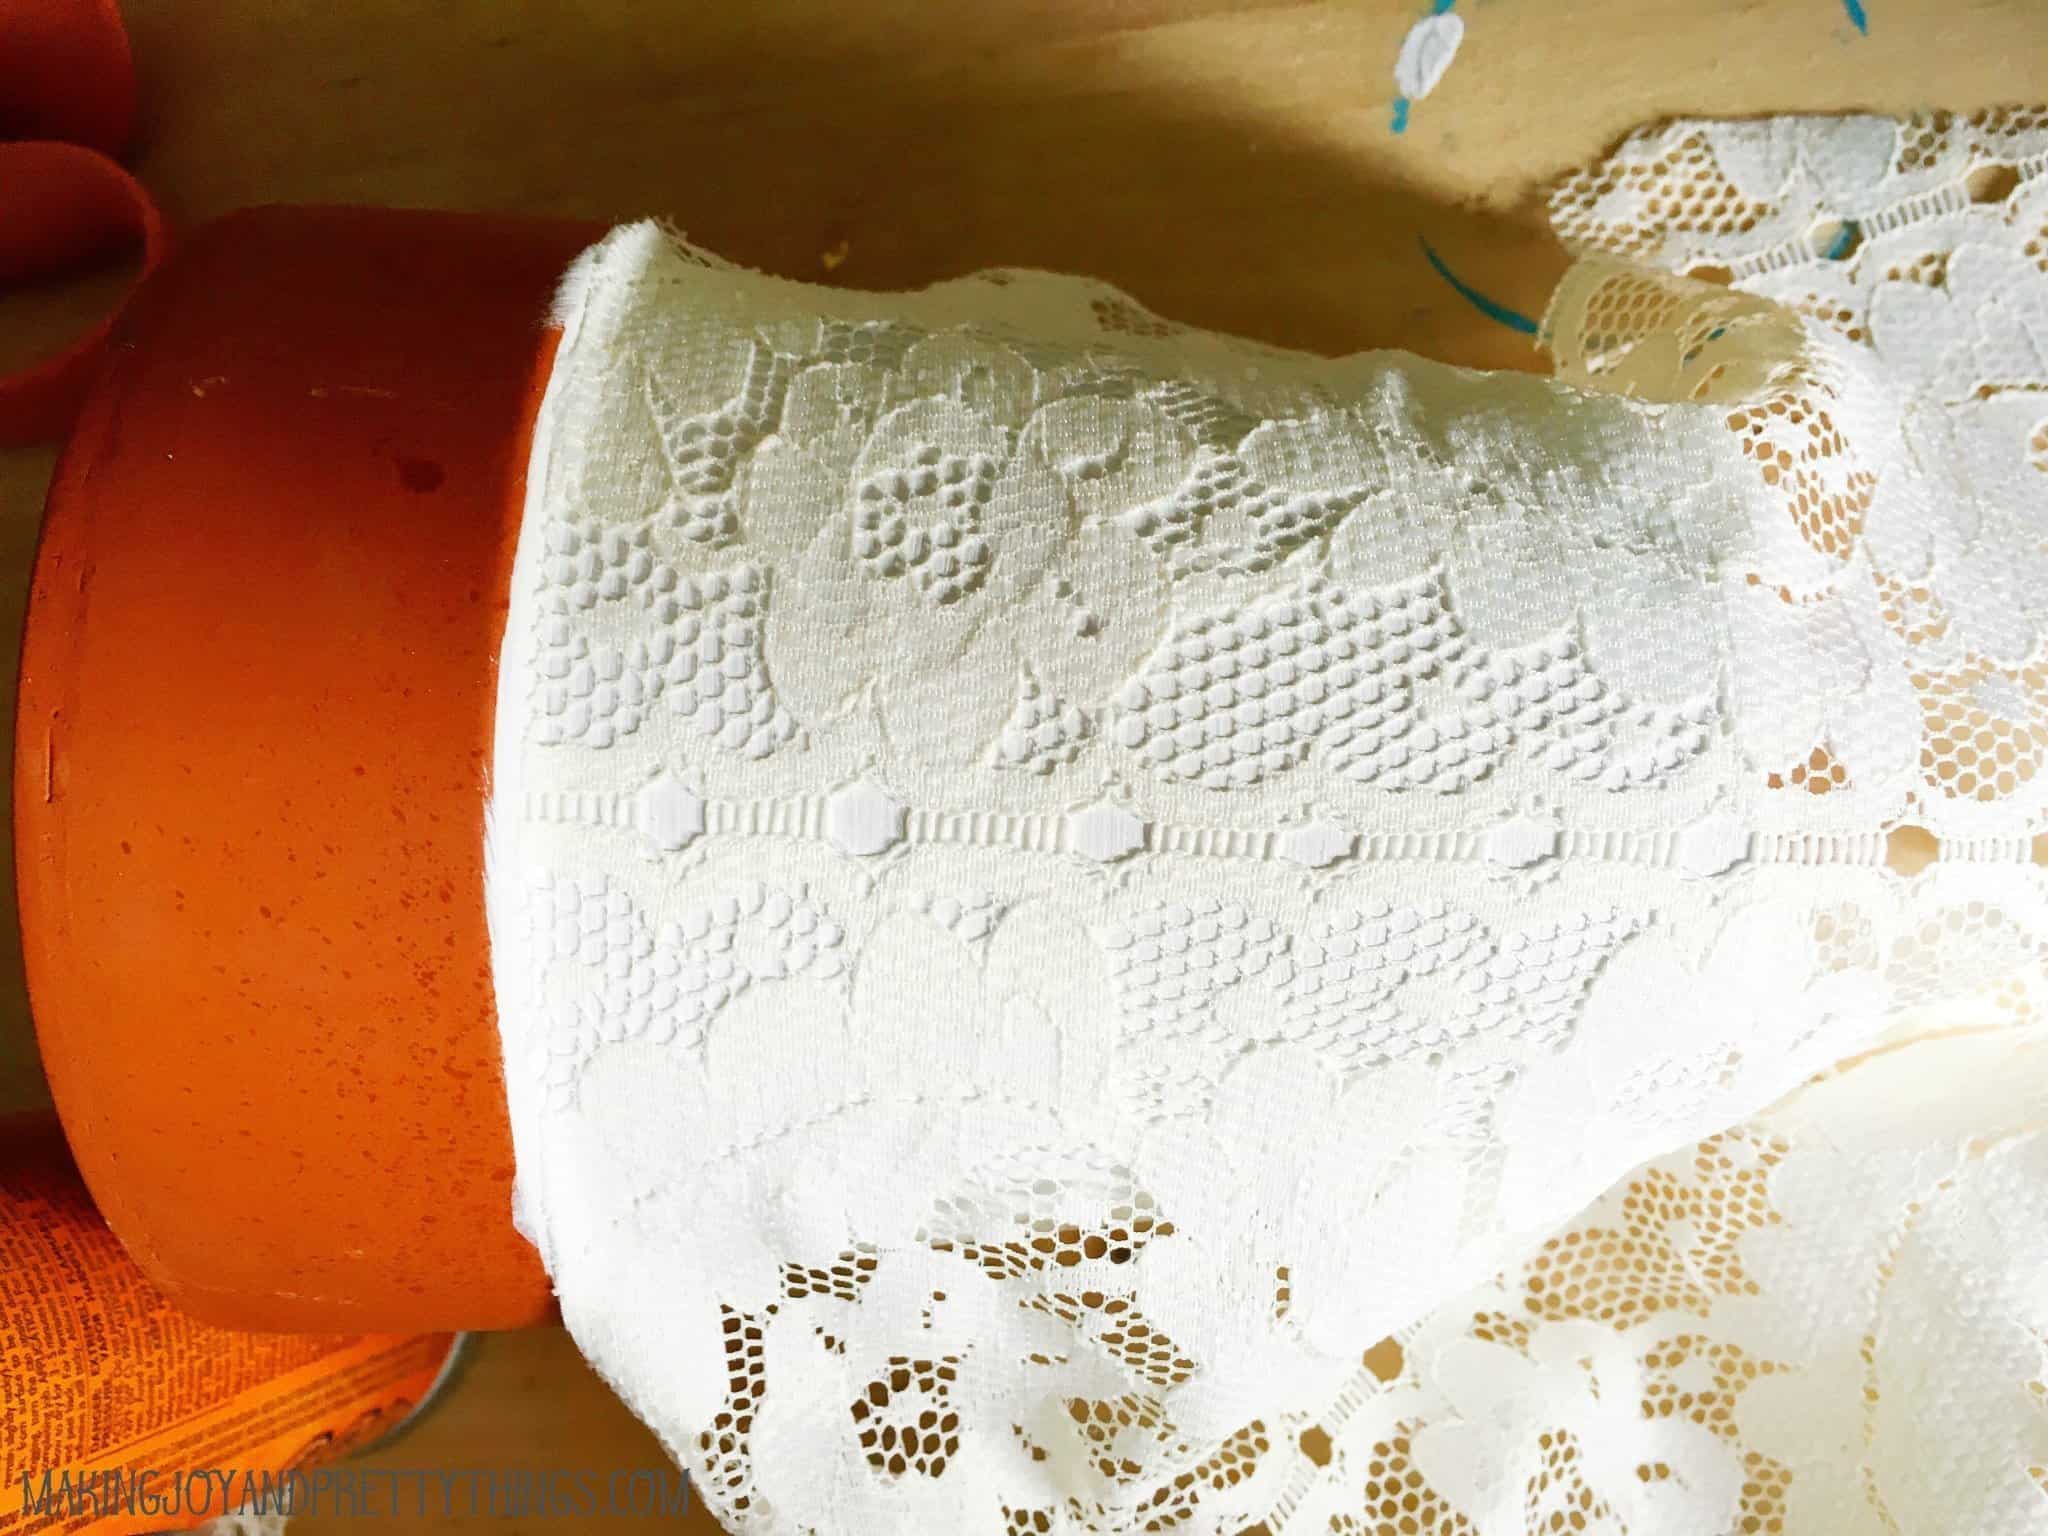 A piece of lace fabric is wrapped around a partially painted terra cotta pot. The lace is wrapped around the white-painted part of the pot, while the natural terra cotta rim remains uncovered.